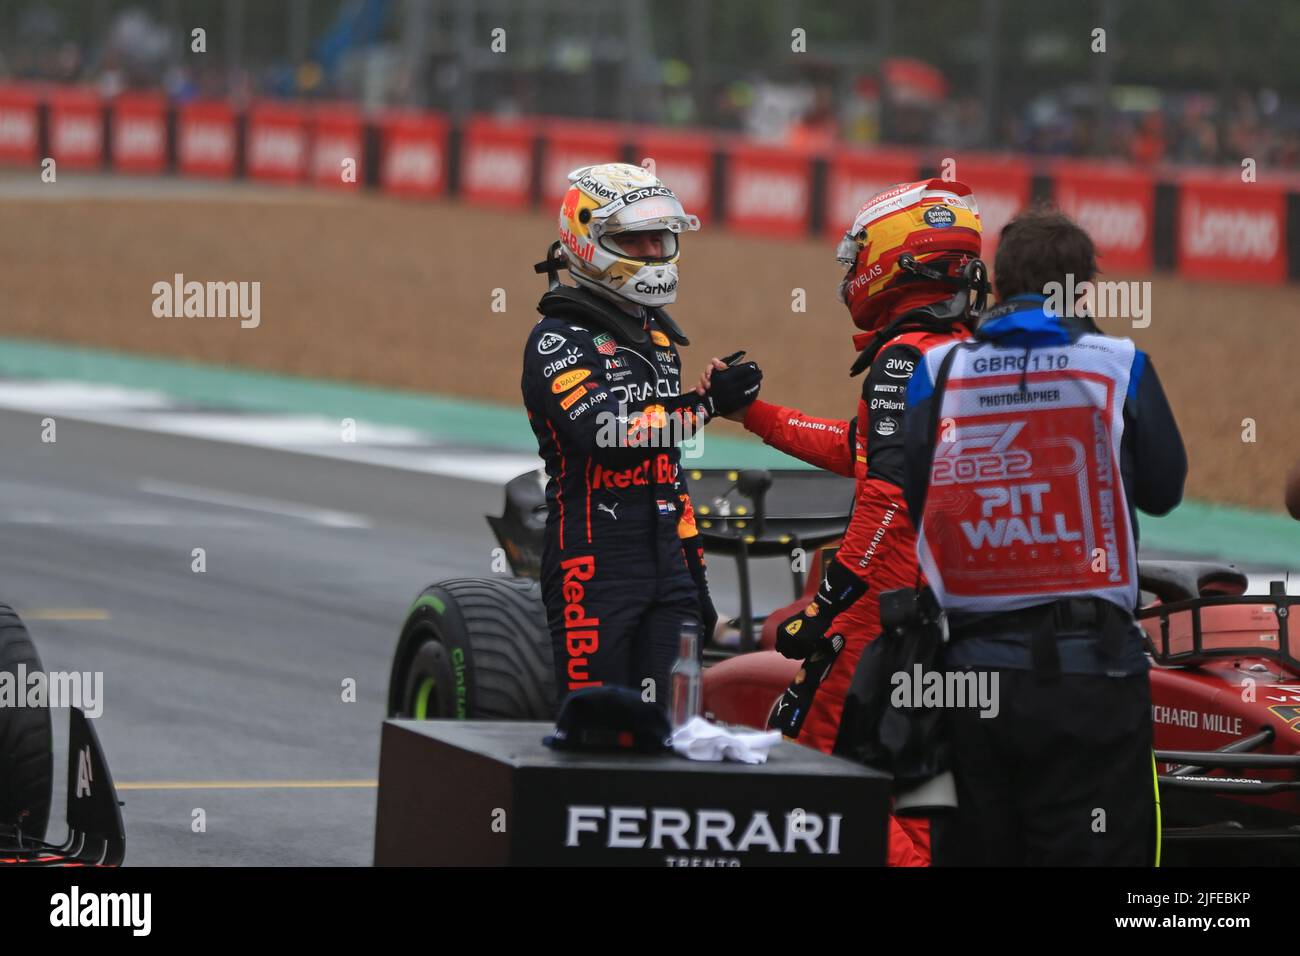 2nd July 2022, Silverstone Circuit, Silverstone, Northamptonshire, England: British F1 Grand Prix, qualifying day: Oracle Red Bull Racing, Max Verstappen shakes hands with pole winner of Scuderia Ferrari, Carlos Sainz Stock Photo